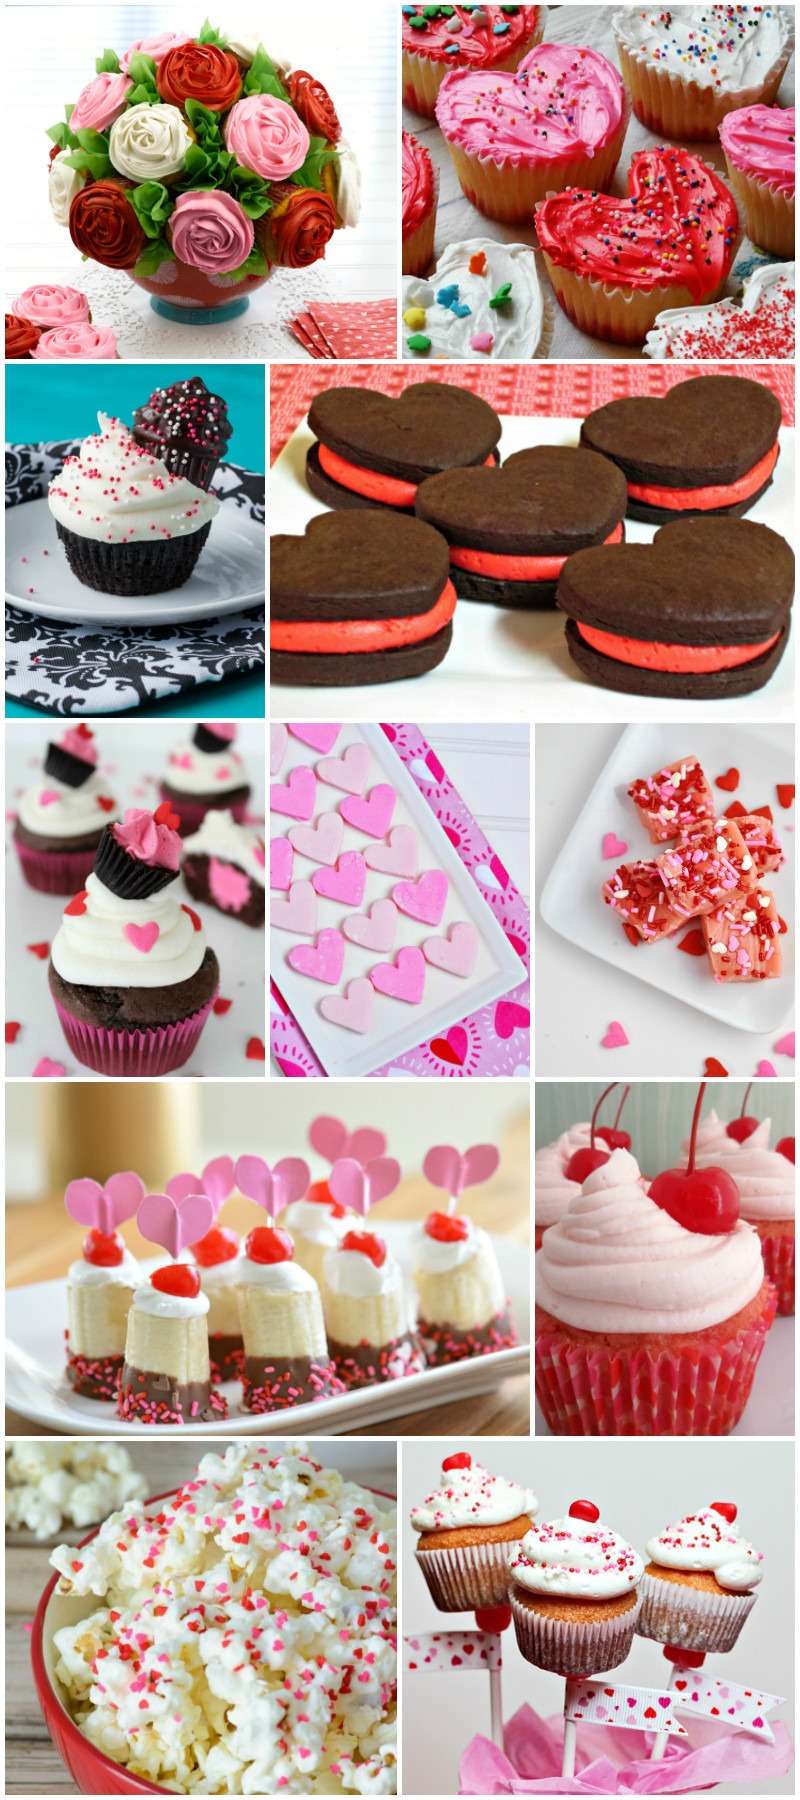 Valentines Day Cake Recipes
 50 Cute and Delicious Valentine’s Day Dessert Recipes